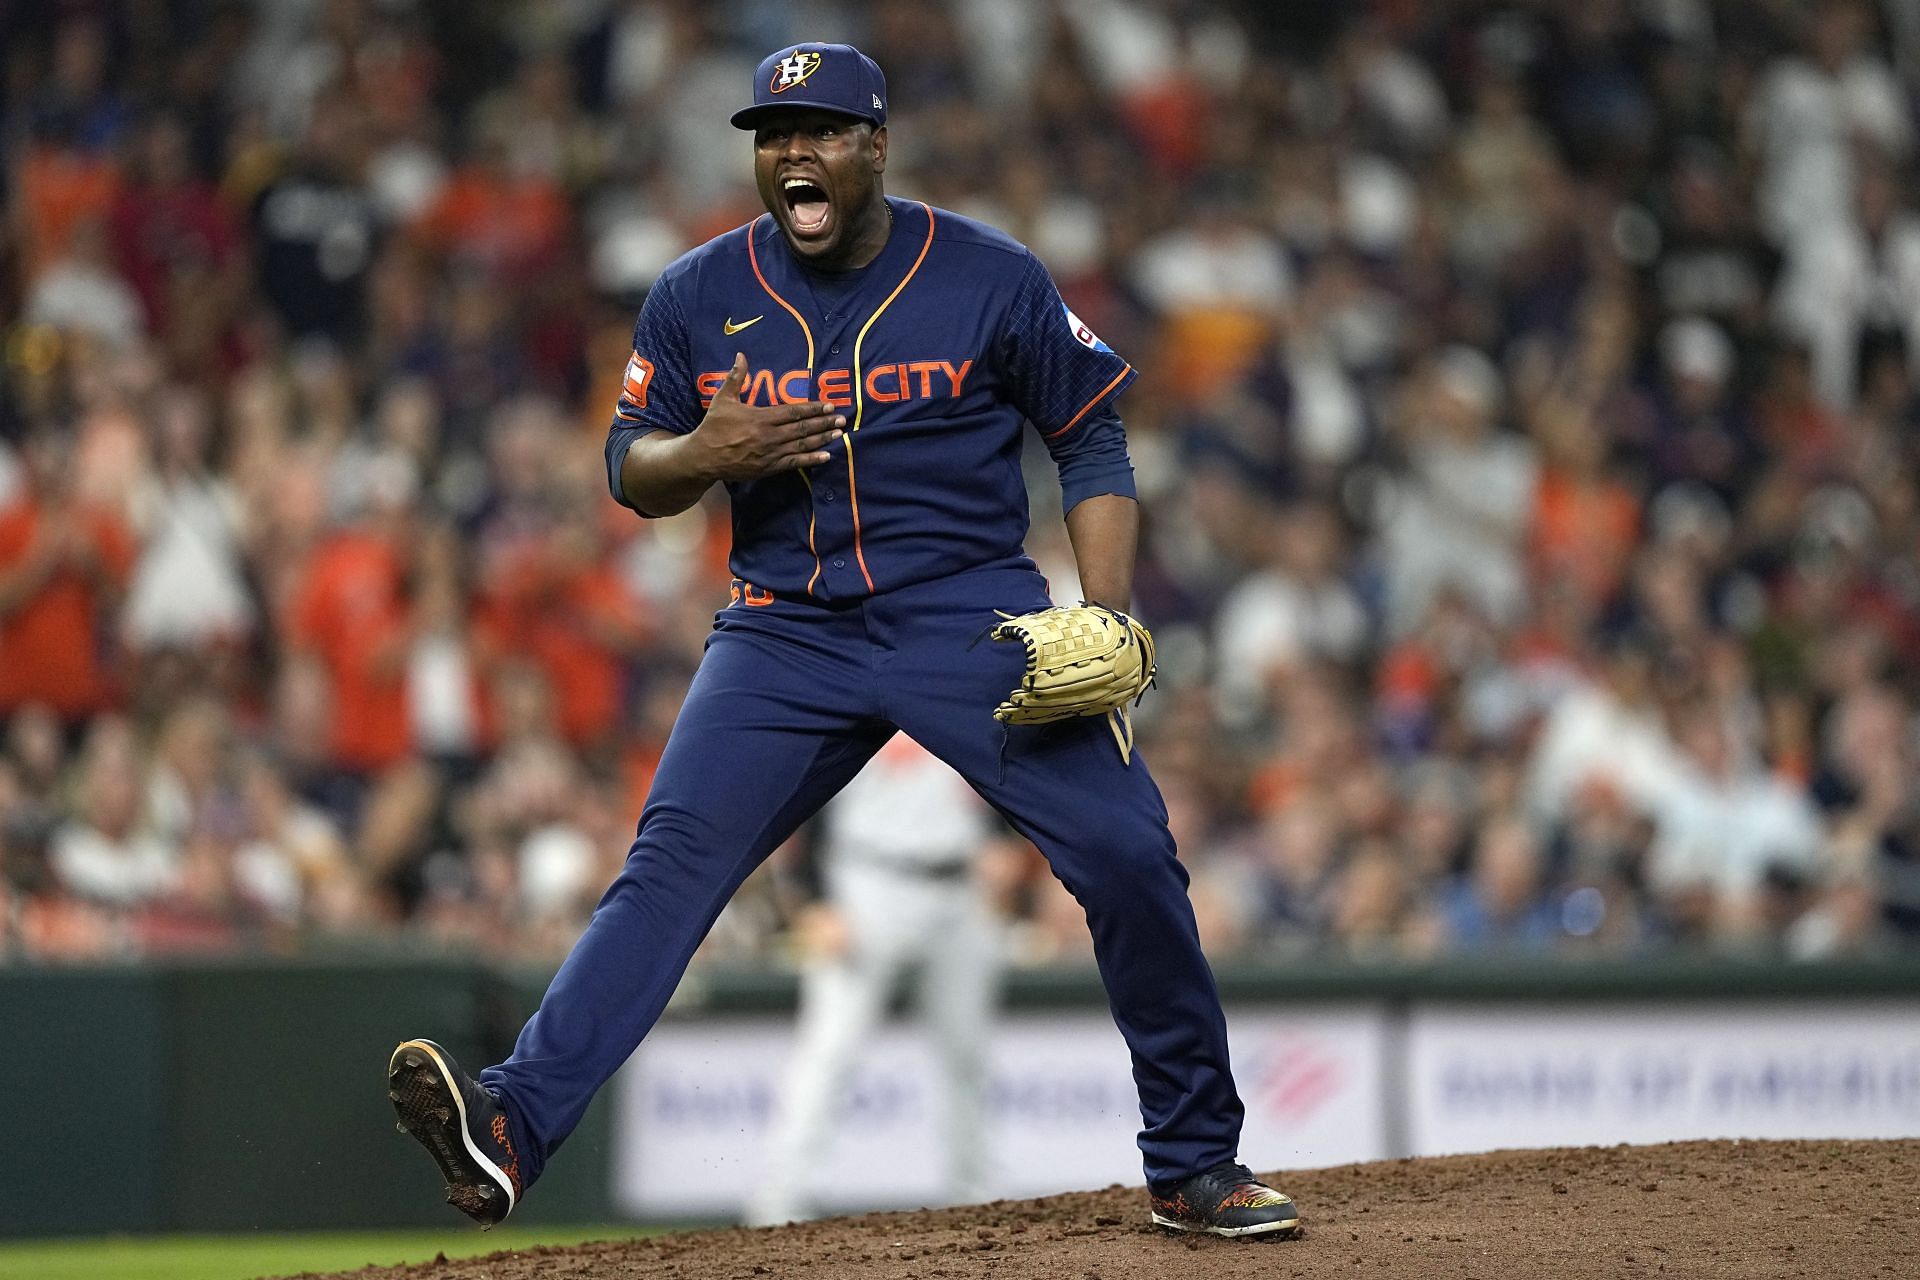 The whole situation was uncalled for': Julio Rodríguez discusses  benches-clearing confrontation with Astros' Hector Neris